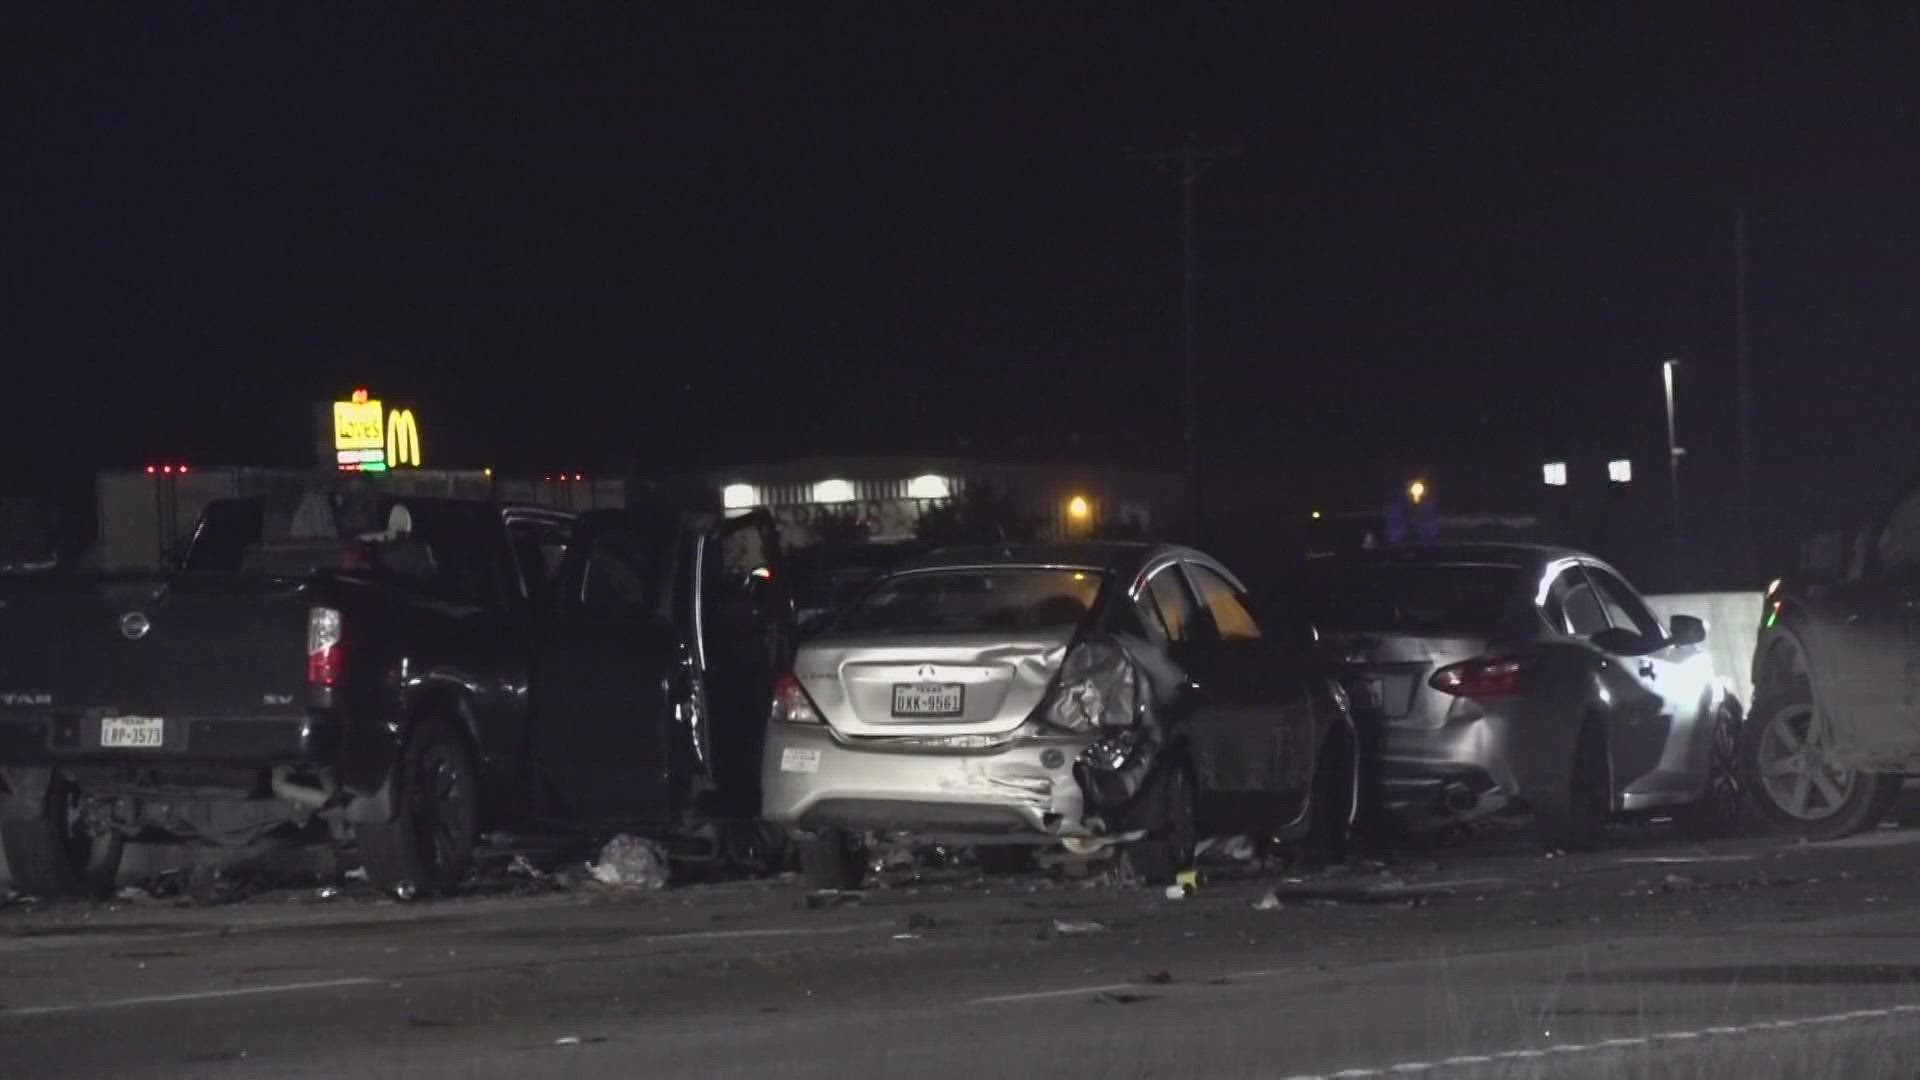 Confirmed by Temple Fire Department - a second child is dead in a multi-vehicle crash on I-35.